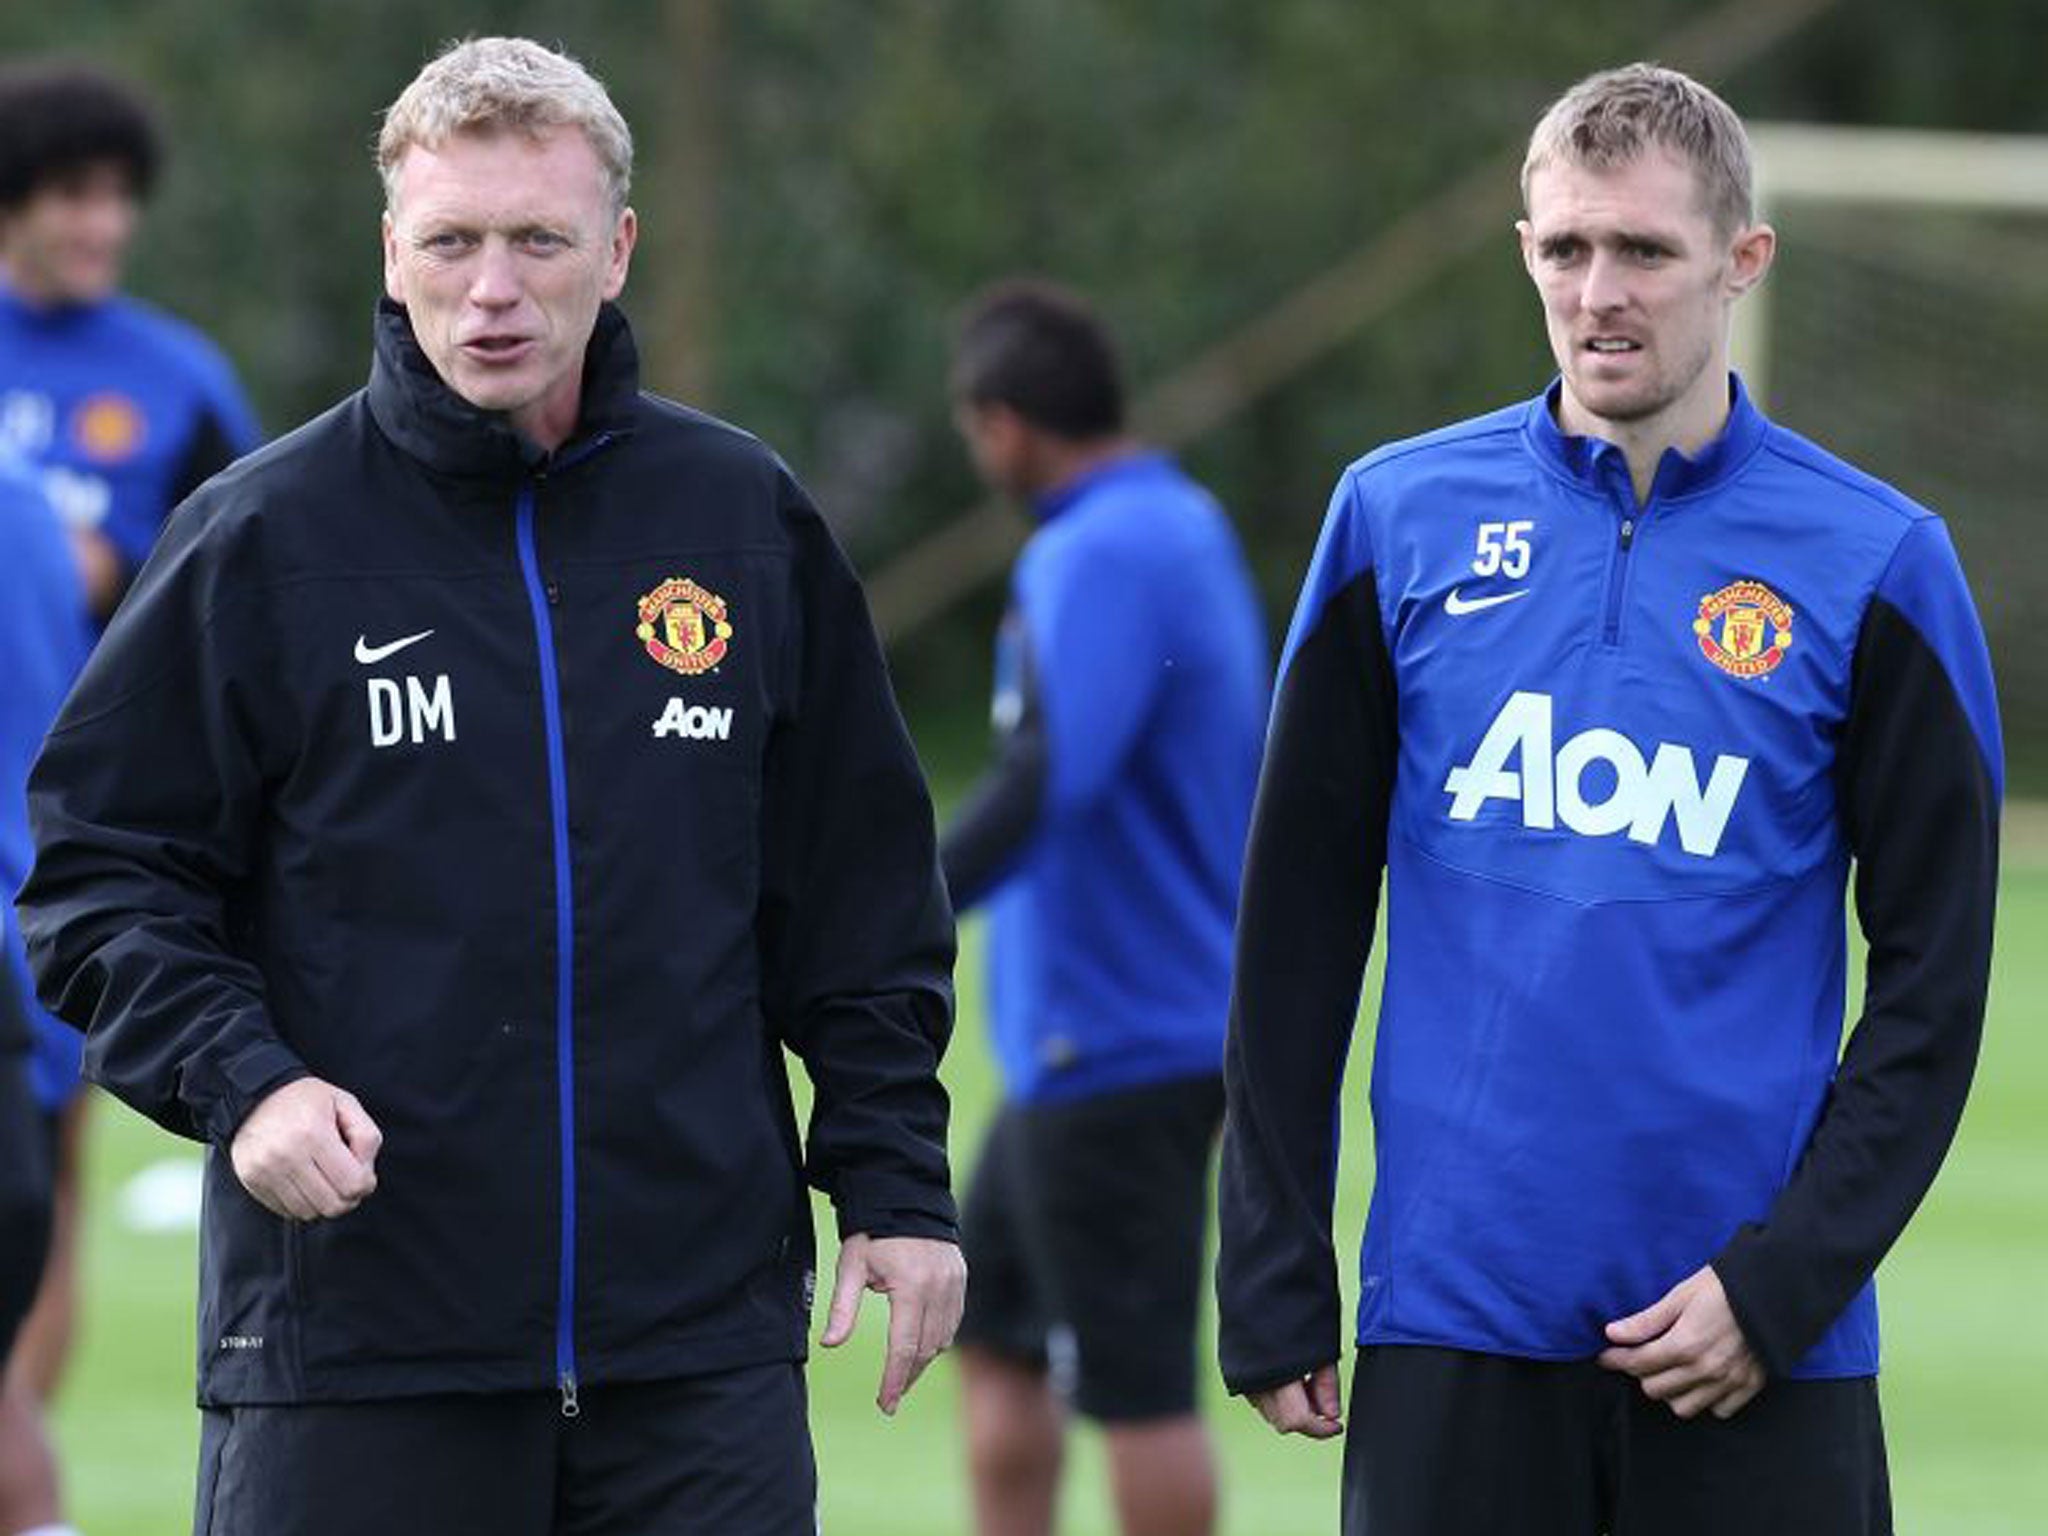 Darren Fletcher has been limited to seven starts in nearly two years